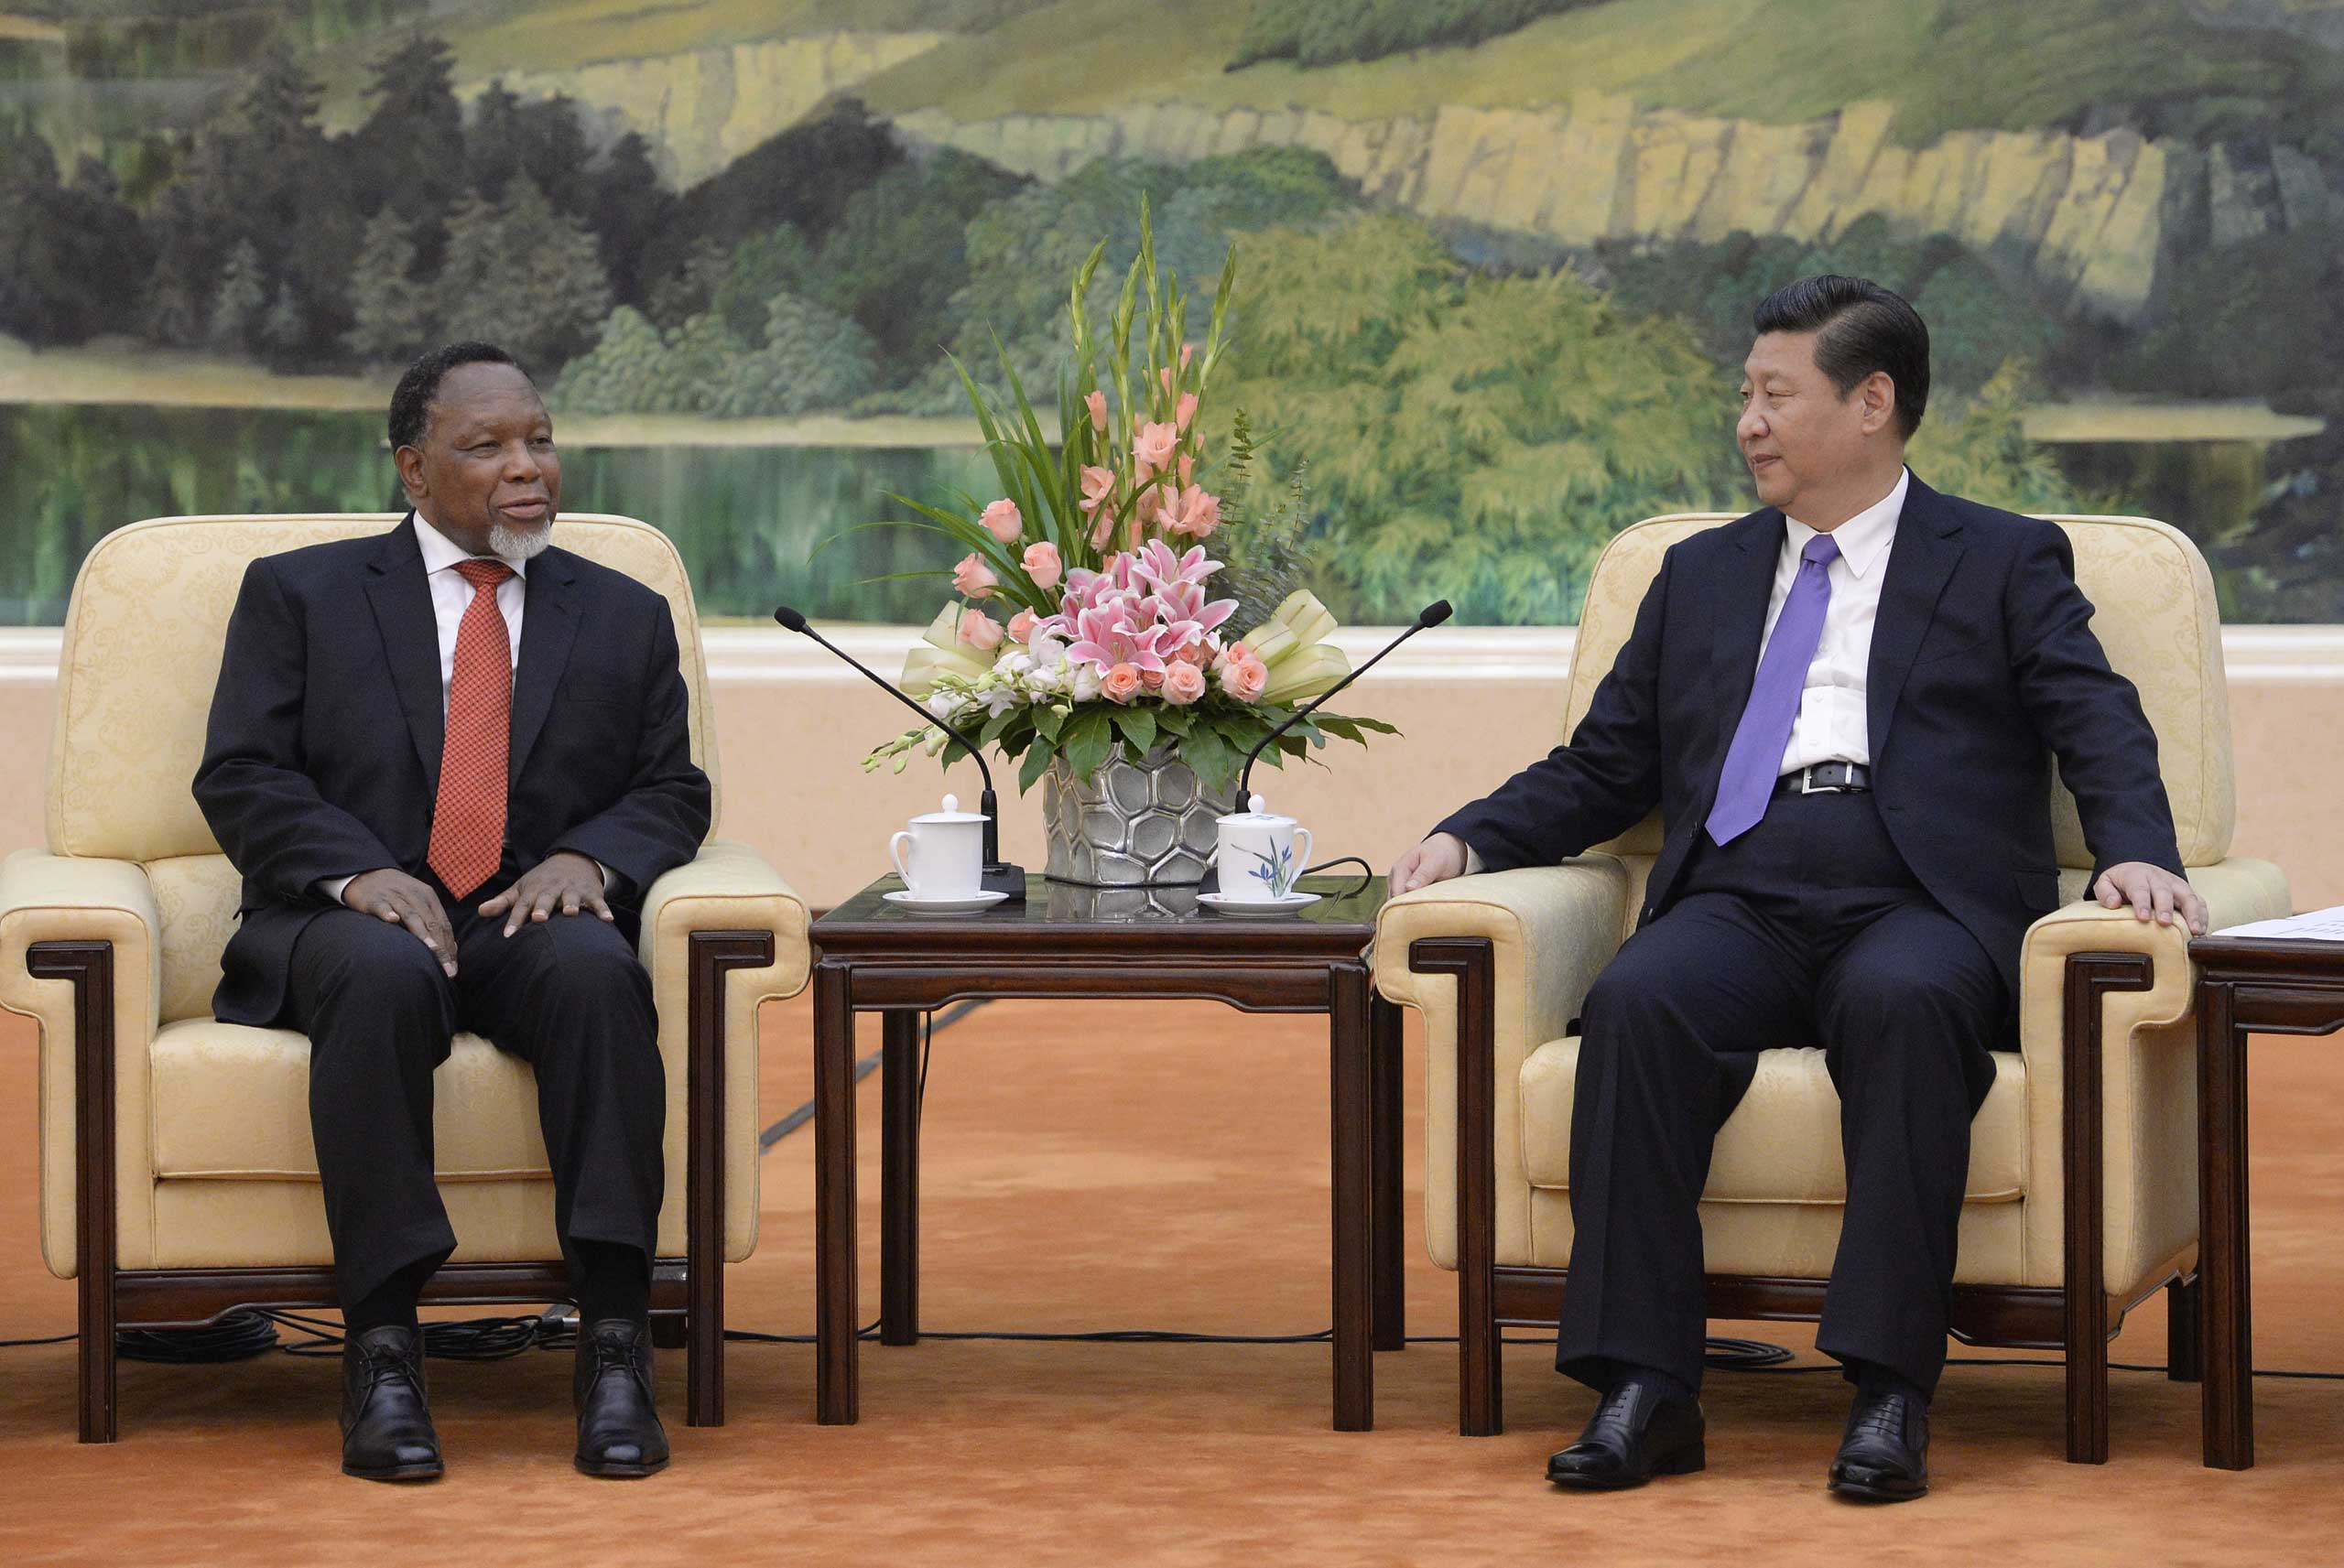 Then-South African Deputy President Kgalema Motlanthe meeting with Chinese President Xi Jinping in Beijing last year. (Getty Images)